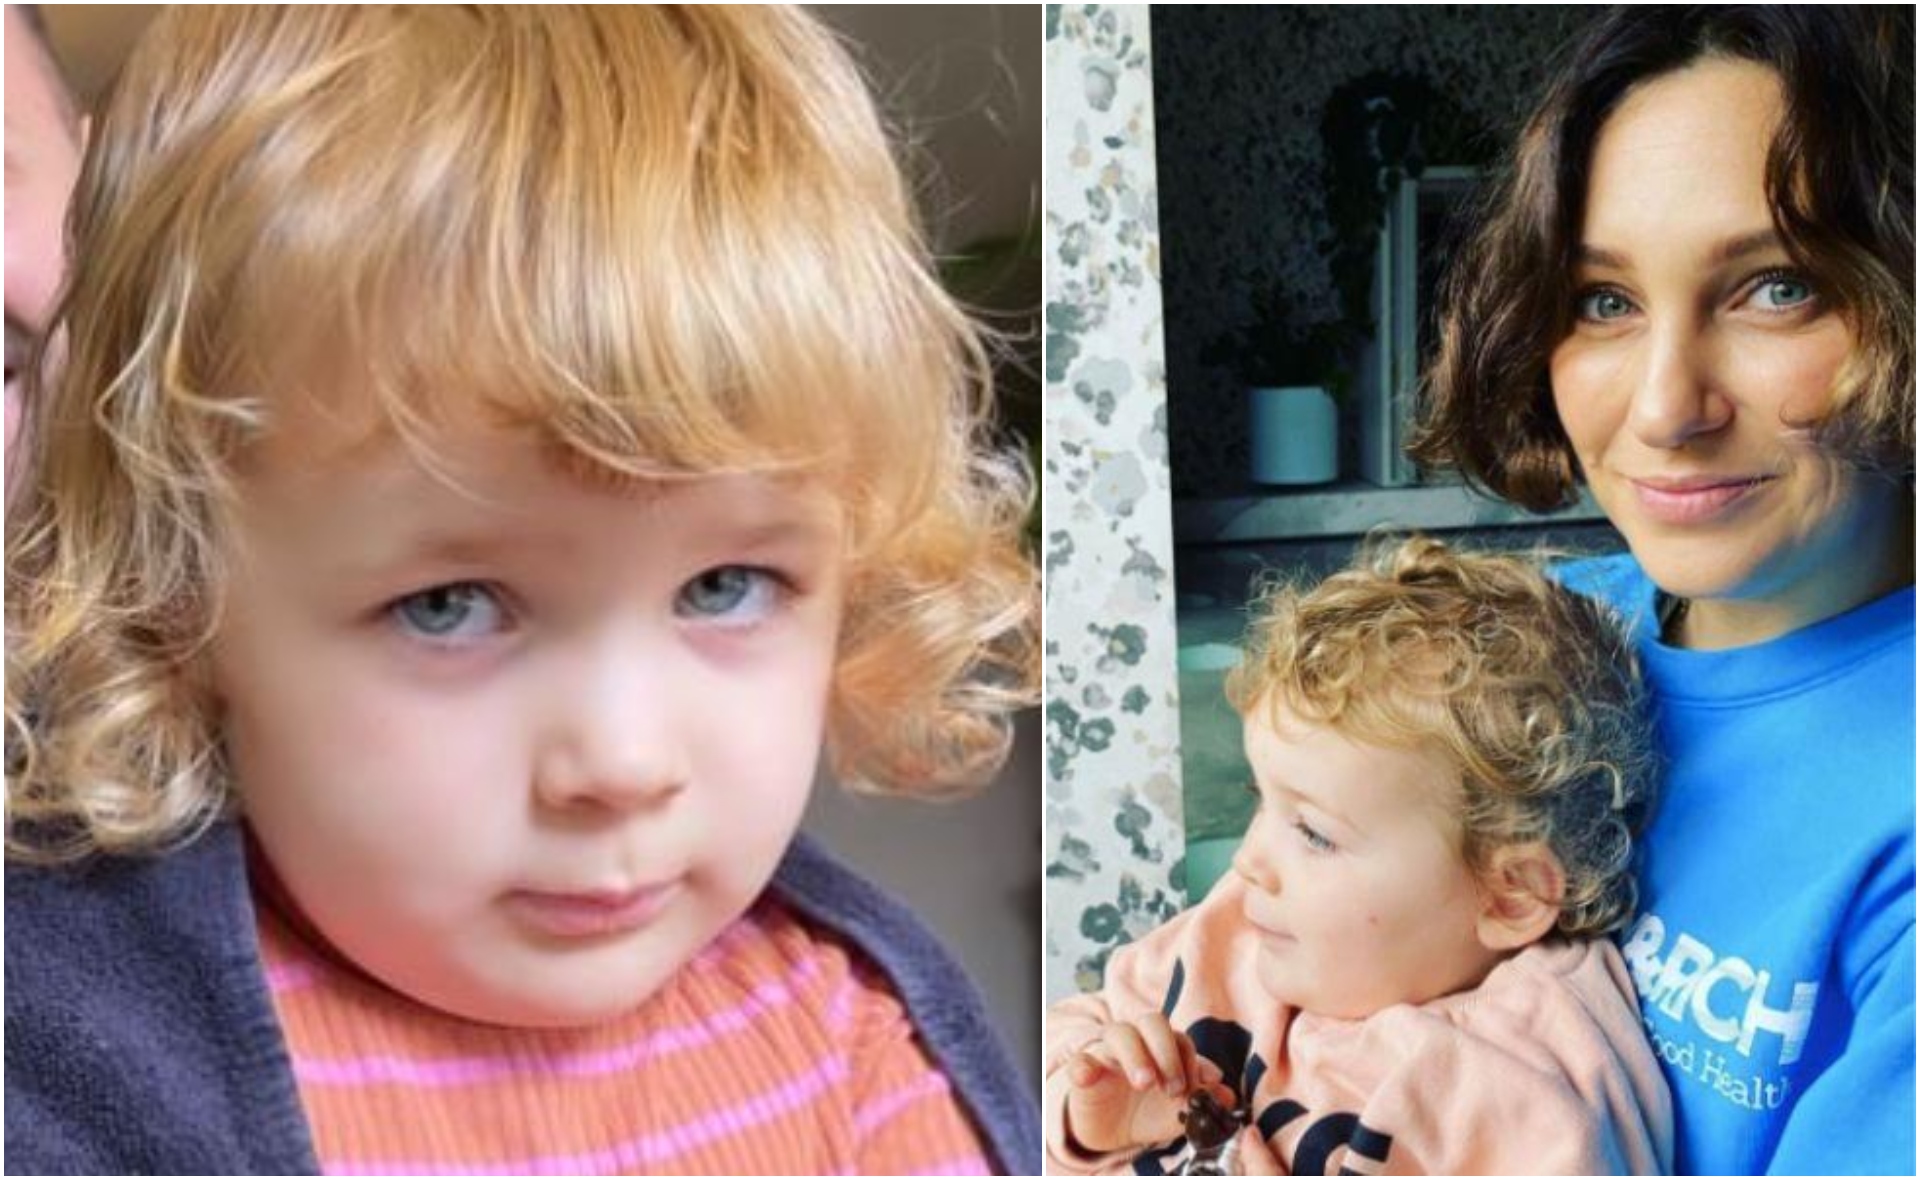 Zoe Foster-Blake’s three-year-old daughter just got a haircut, and her reaction is… unexpected